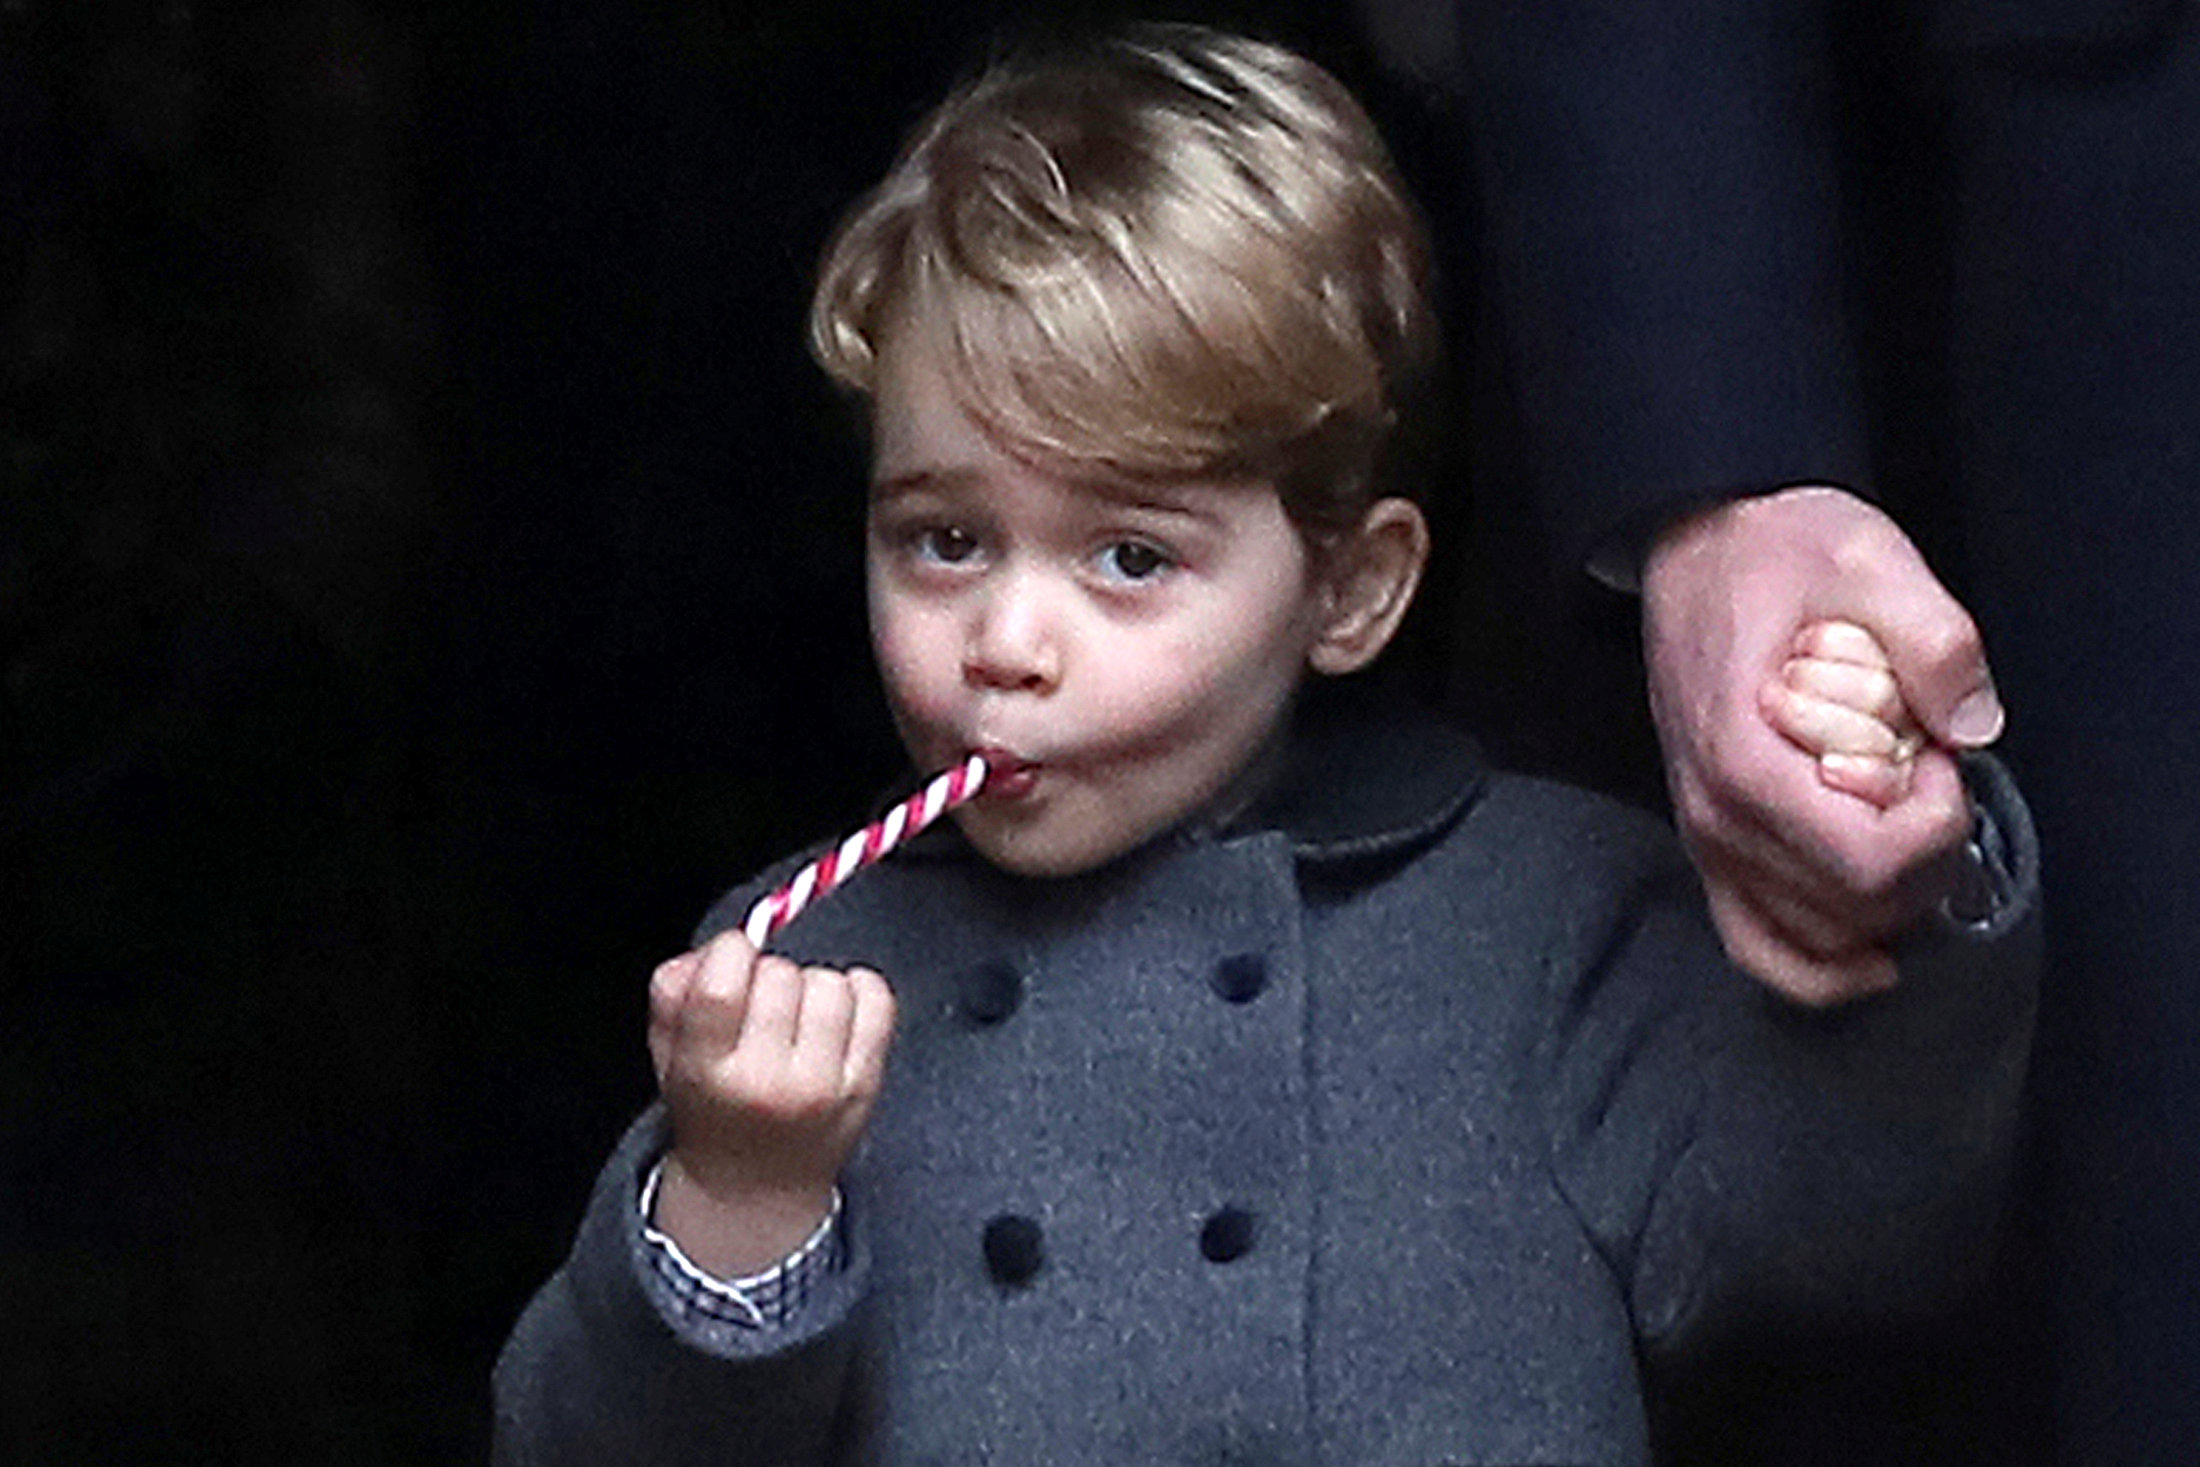 nPrince George, the son of the Duke and Duchess of Cambridge, sucks a sweet as he leaves following the morning Christmas Day service at St Mark's Church in Englefield, near Bucklebury in southern England December 25, 2016. u00e2u20acu201d Reuters pic